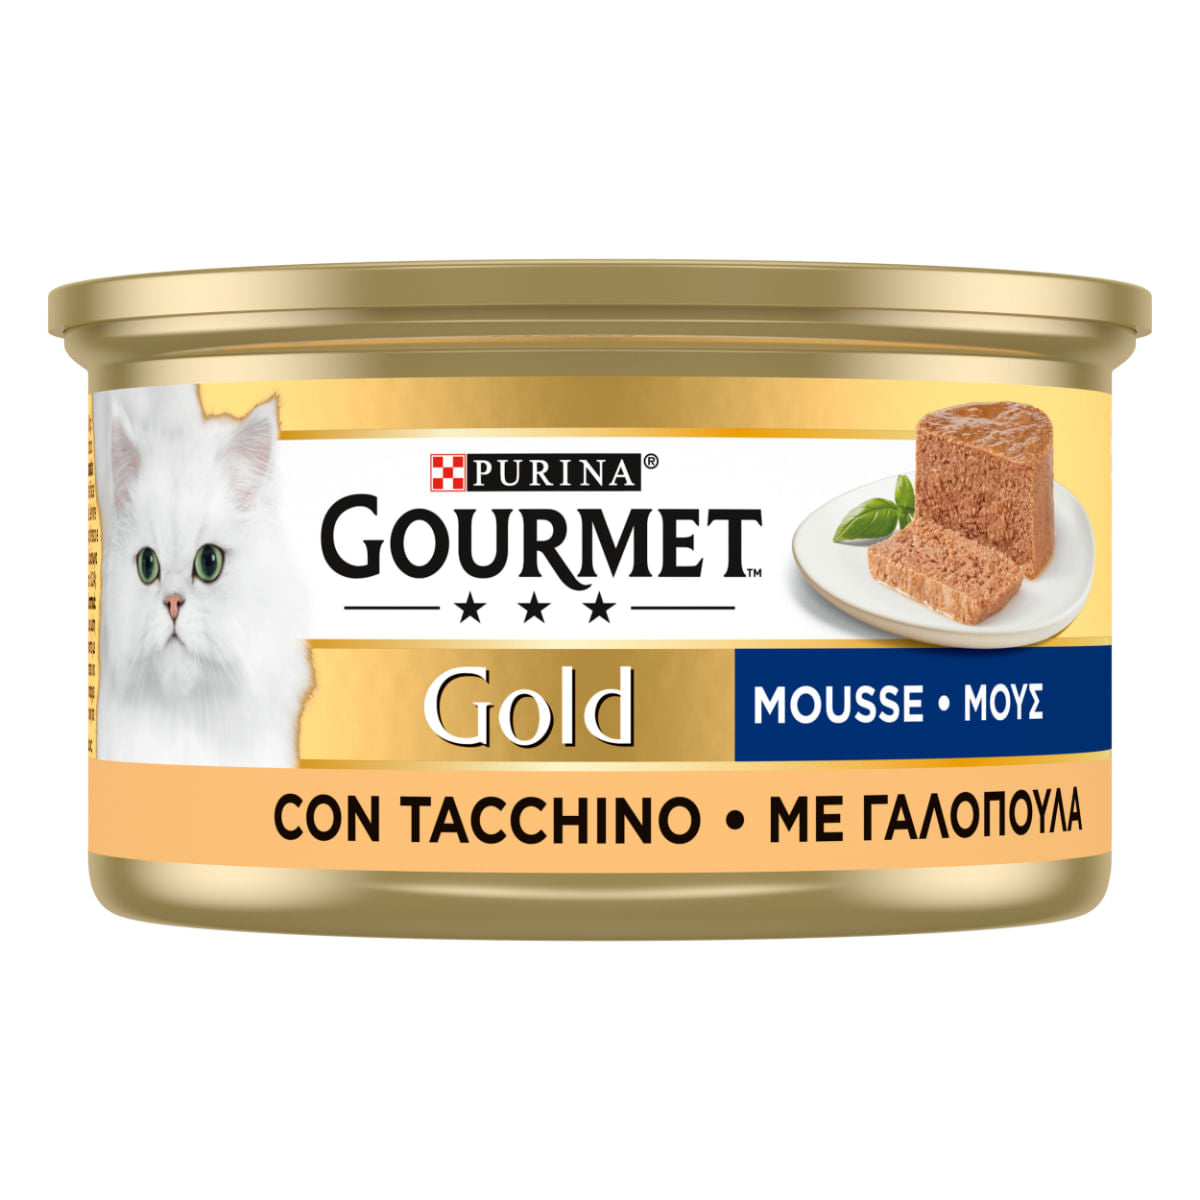 Gourmet Gold 85gr Mousse con Tacchino